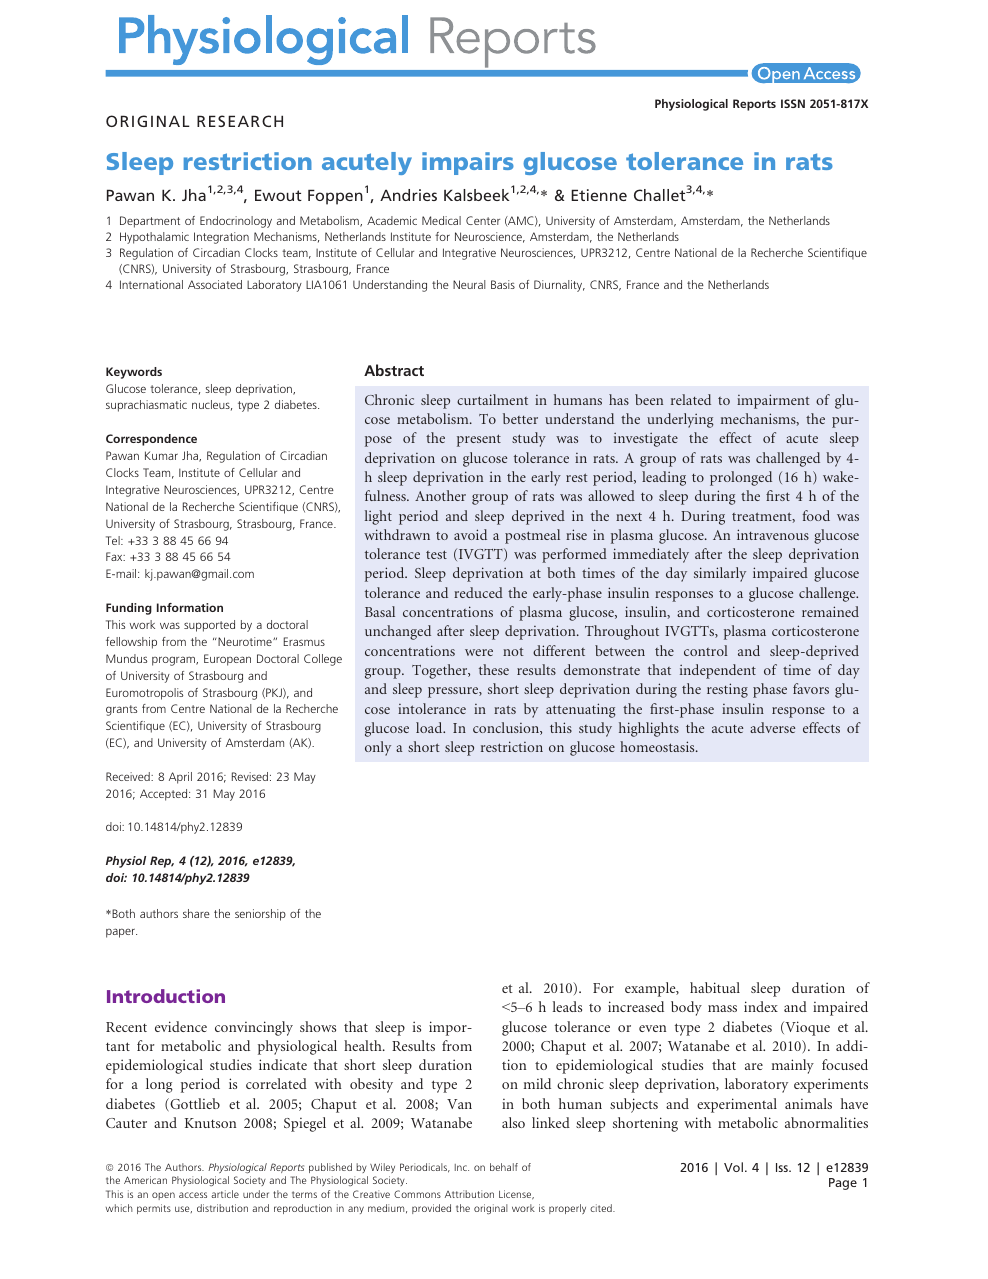 Sleep restriction acutely impairs glucose tolerance in rats – topic of  research paper in Biological sciences. Download scholarly article PDF and  read for free on CyberLeninka open science hub.